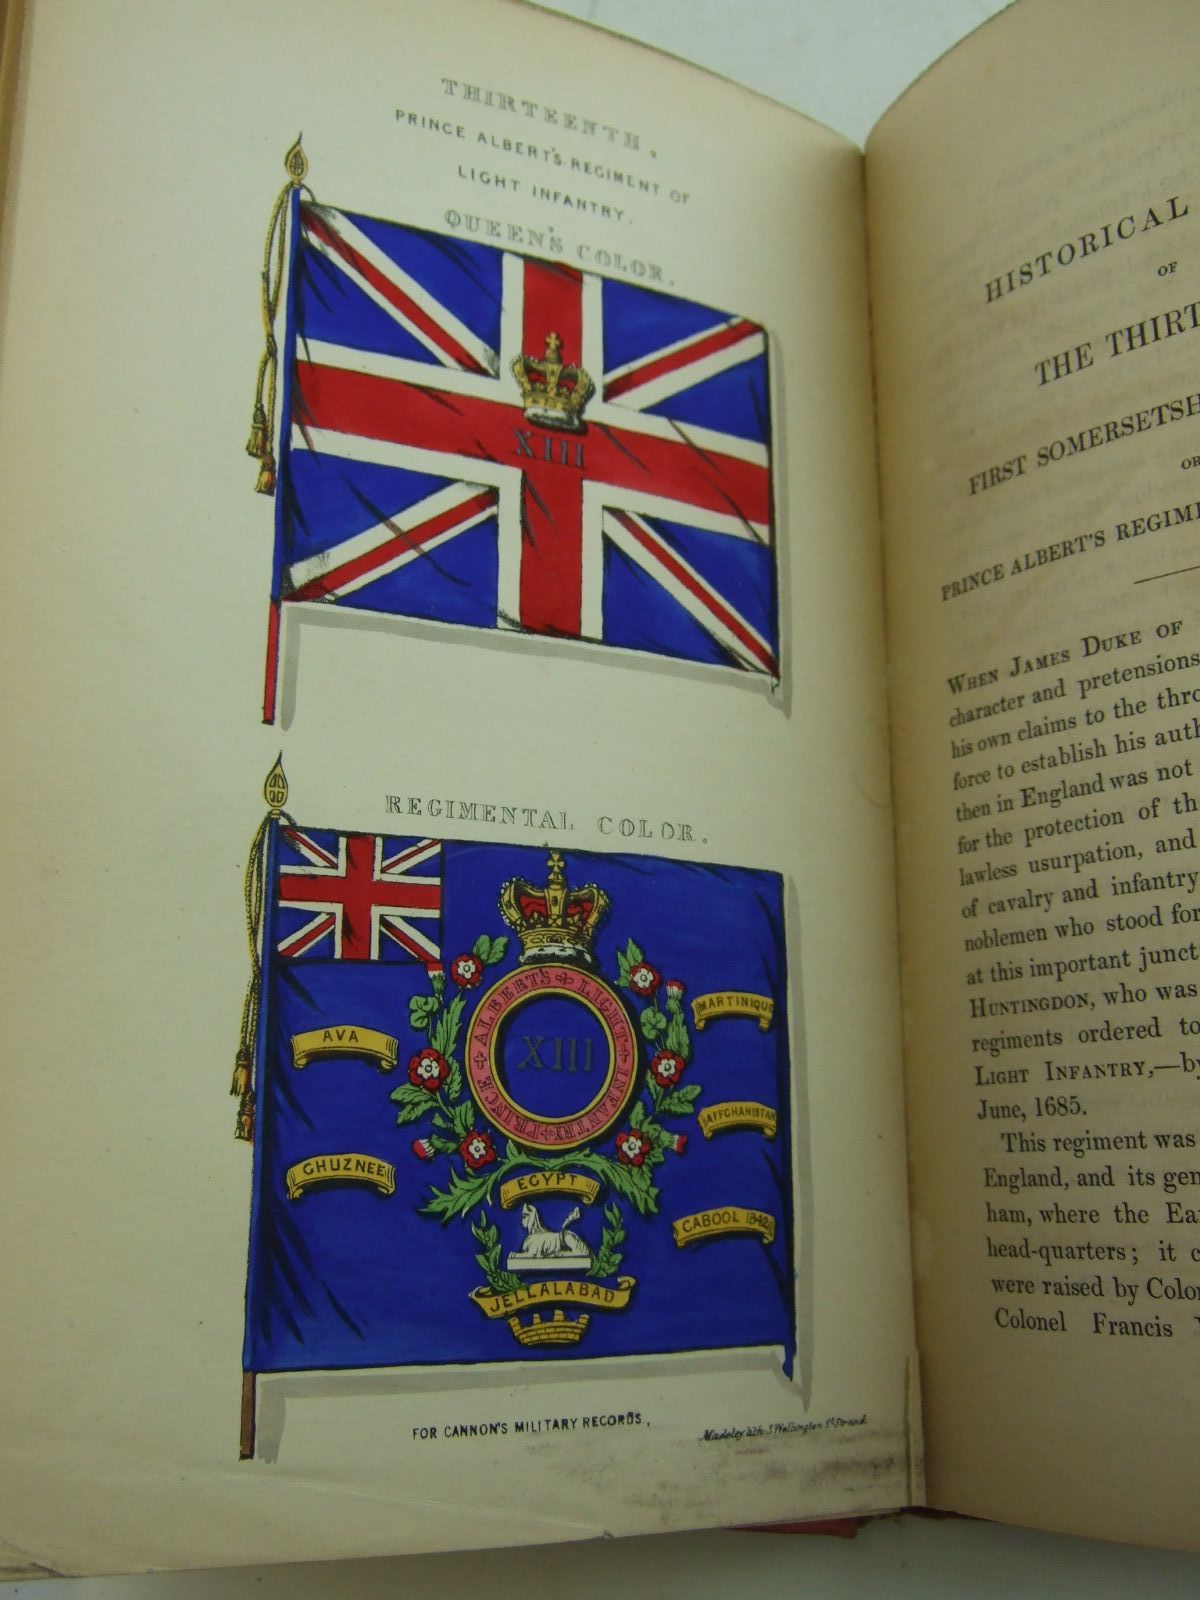 Photo of HISTORICAL RECORD OF THE THIRTEENTH, FIRST SOMERSET, THE PRINCE ALBERT'S REGIMENT OF LIGHT INFANTRY written by Cannon, Richard published by Parker, Furnivall & Parker (STOCK CODE: 2109177)  for sale by Stella & Rose's Books